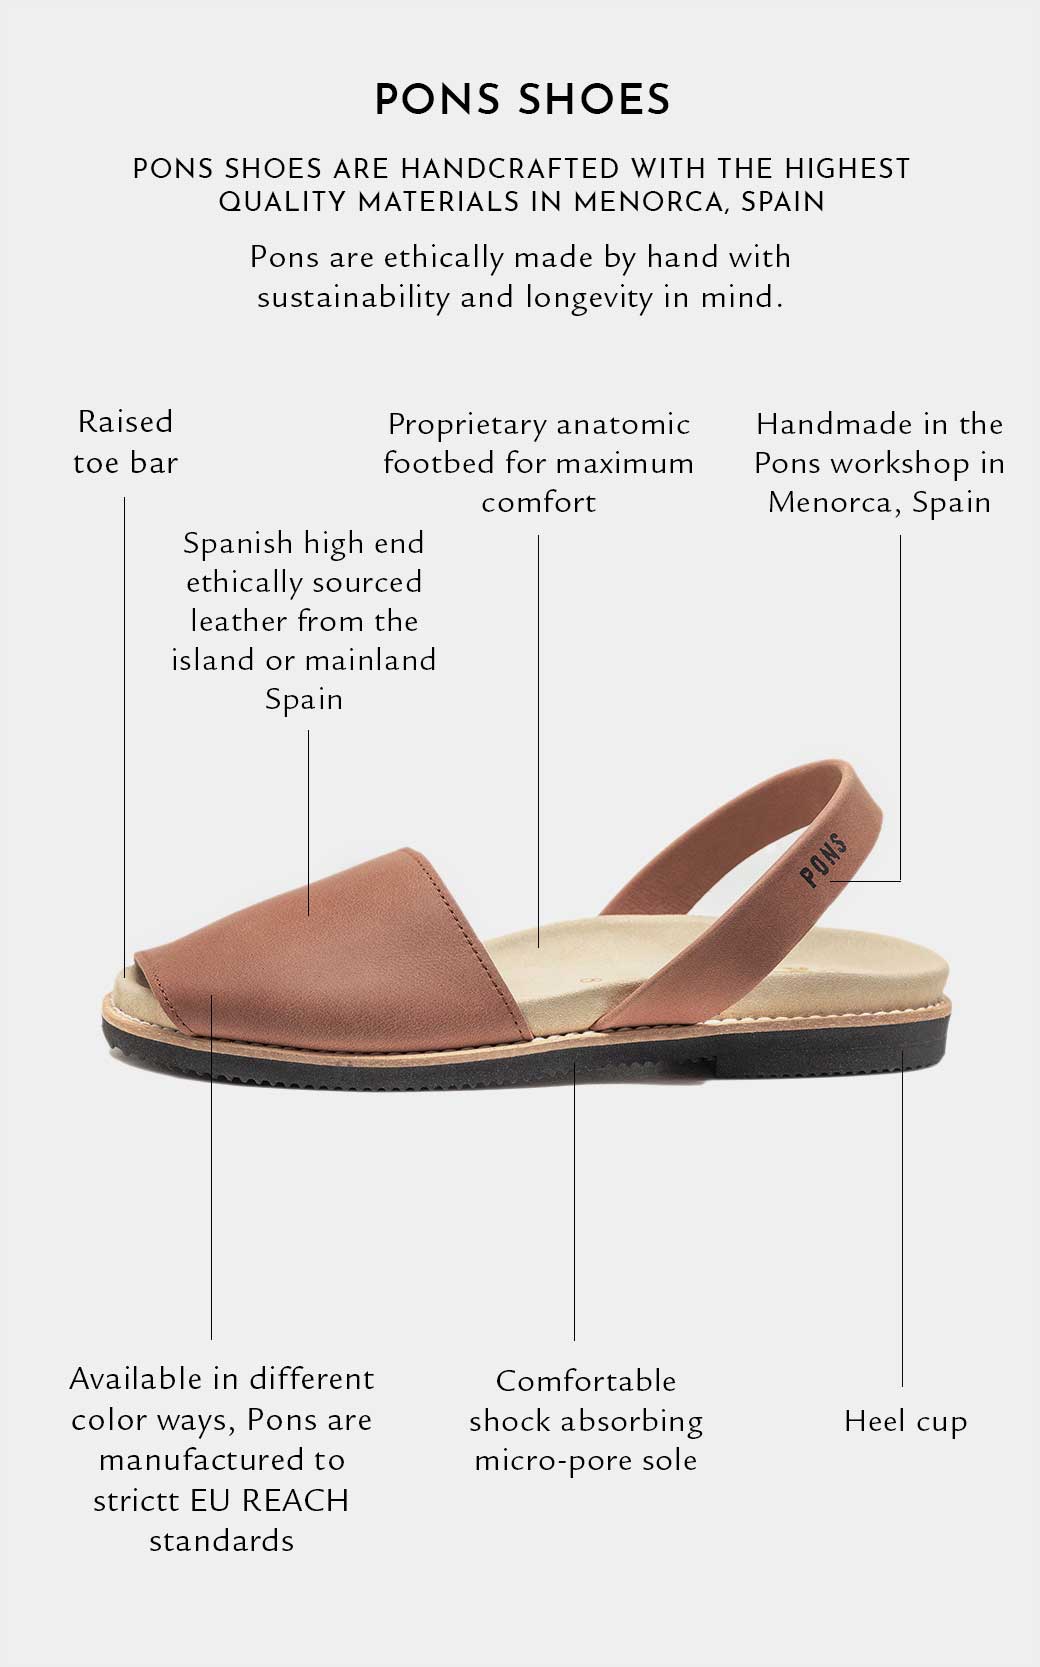 The Most Comfortable Pons: Anatomic Shoes with Arch Support and a Heel Cup